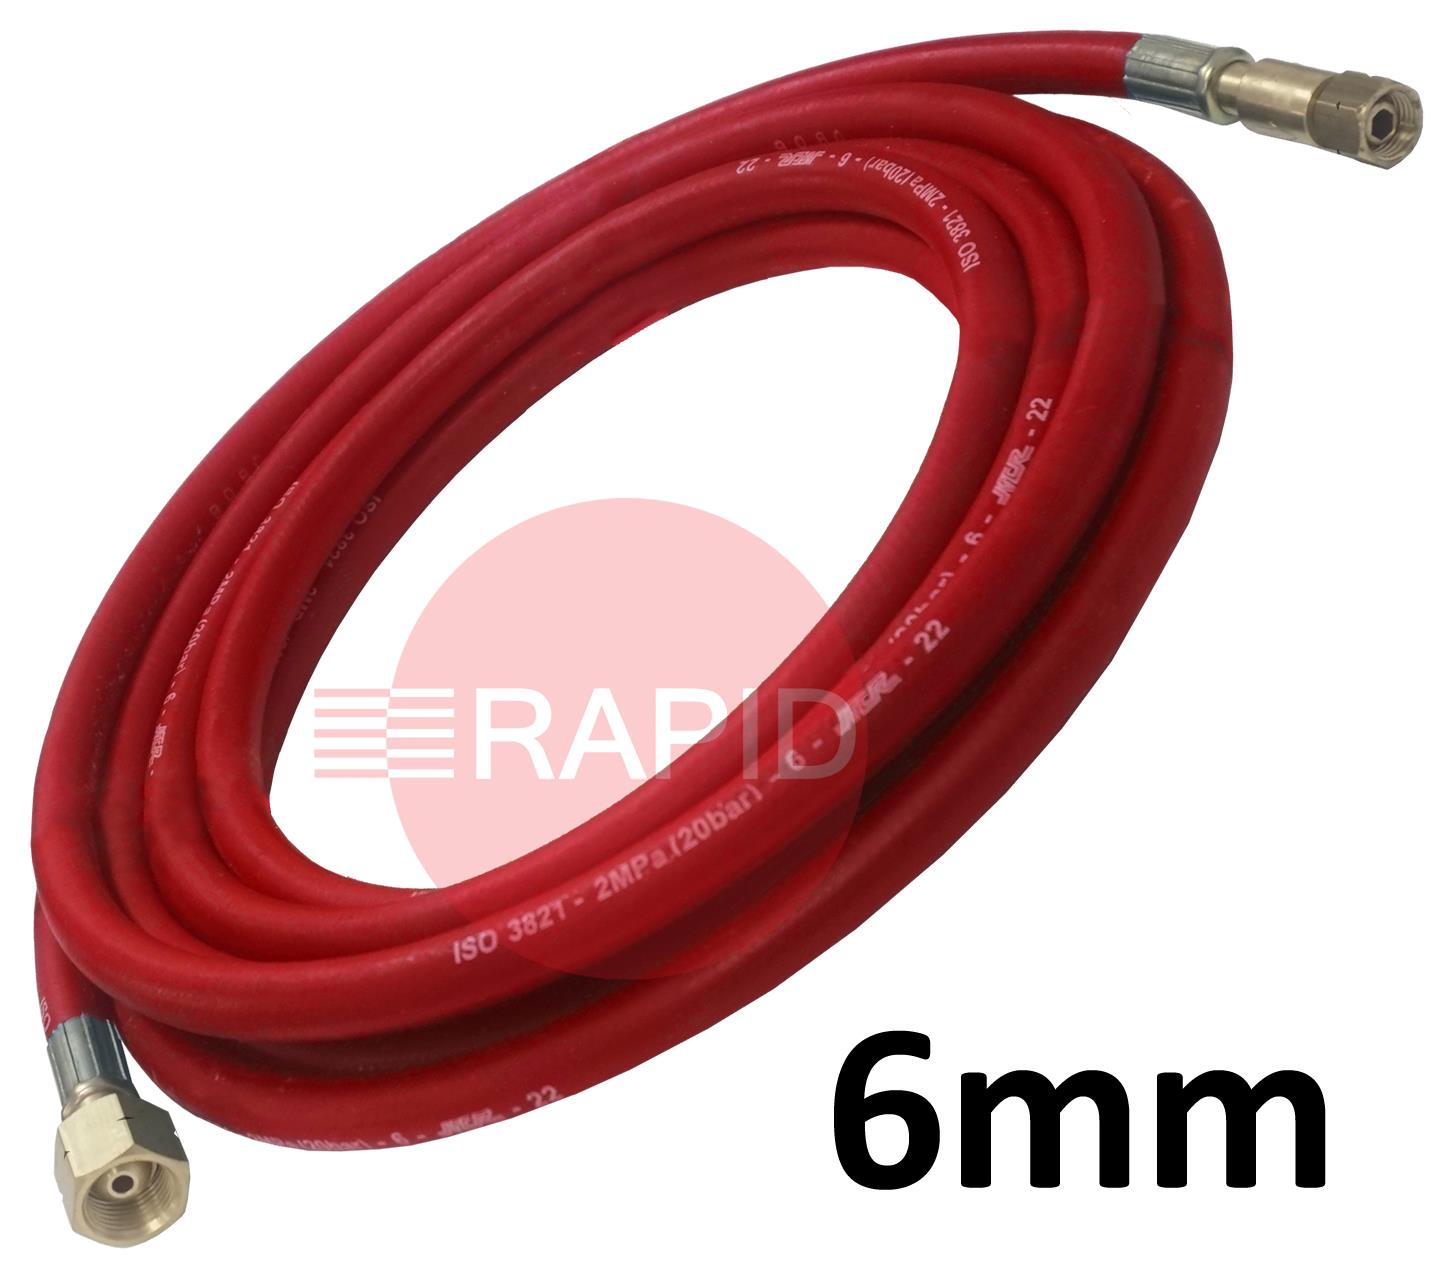 A5121  Fitted Acetylene Hose. 6mm Bore. G1/4 Check Valve & G3/8 Regulator Connection - 10m